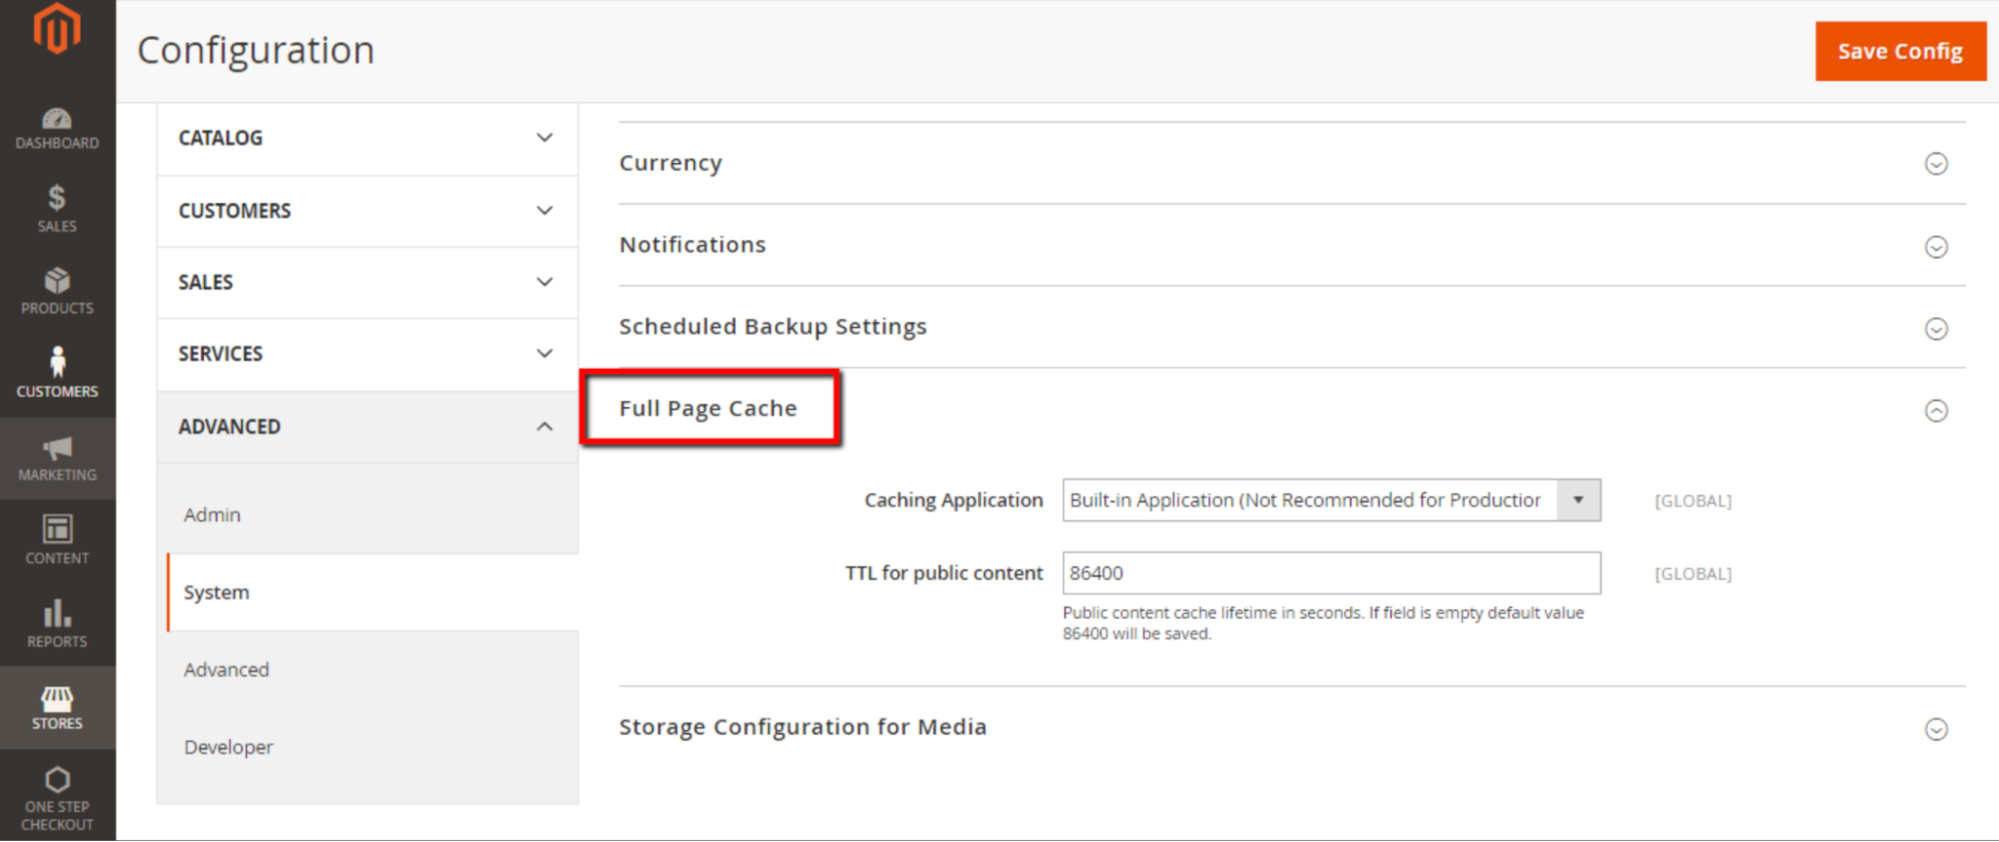 go to System Cache Management and enable Full Page Cache